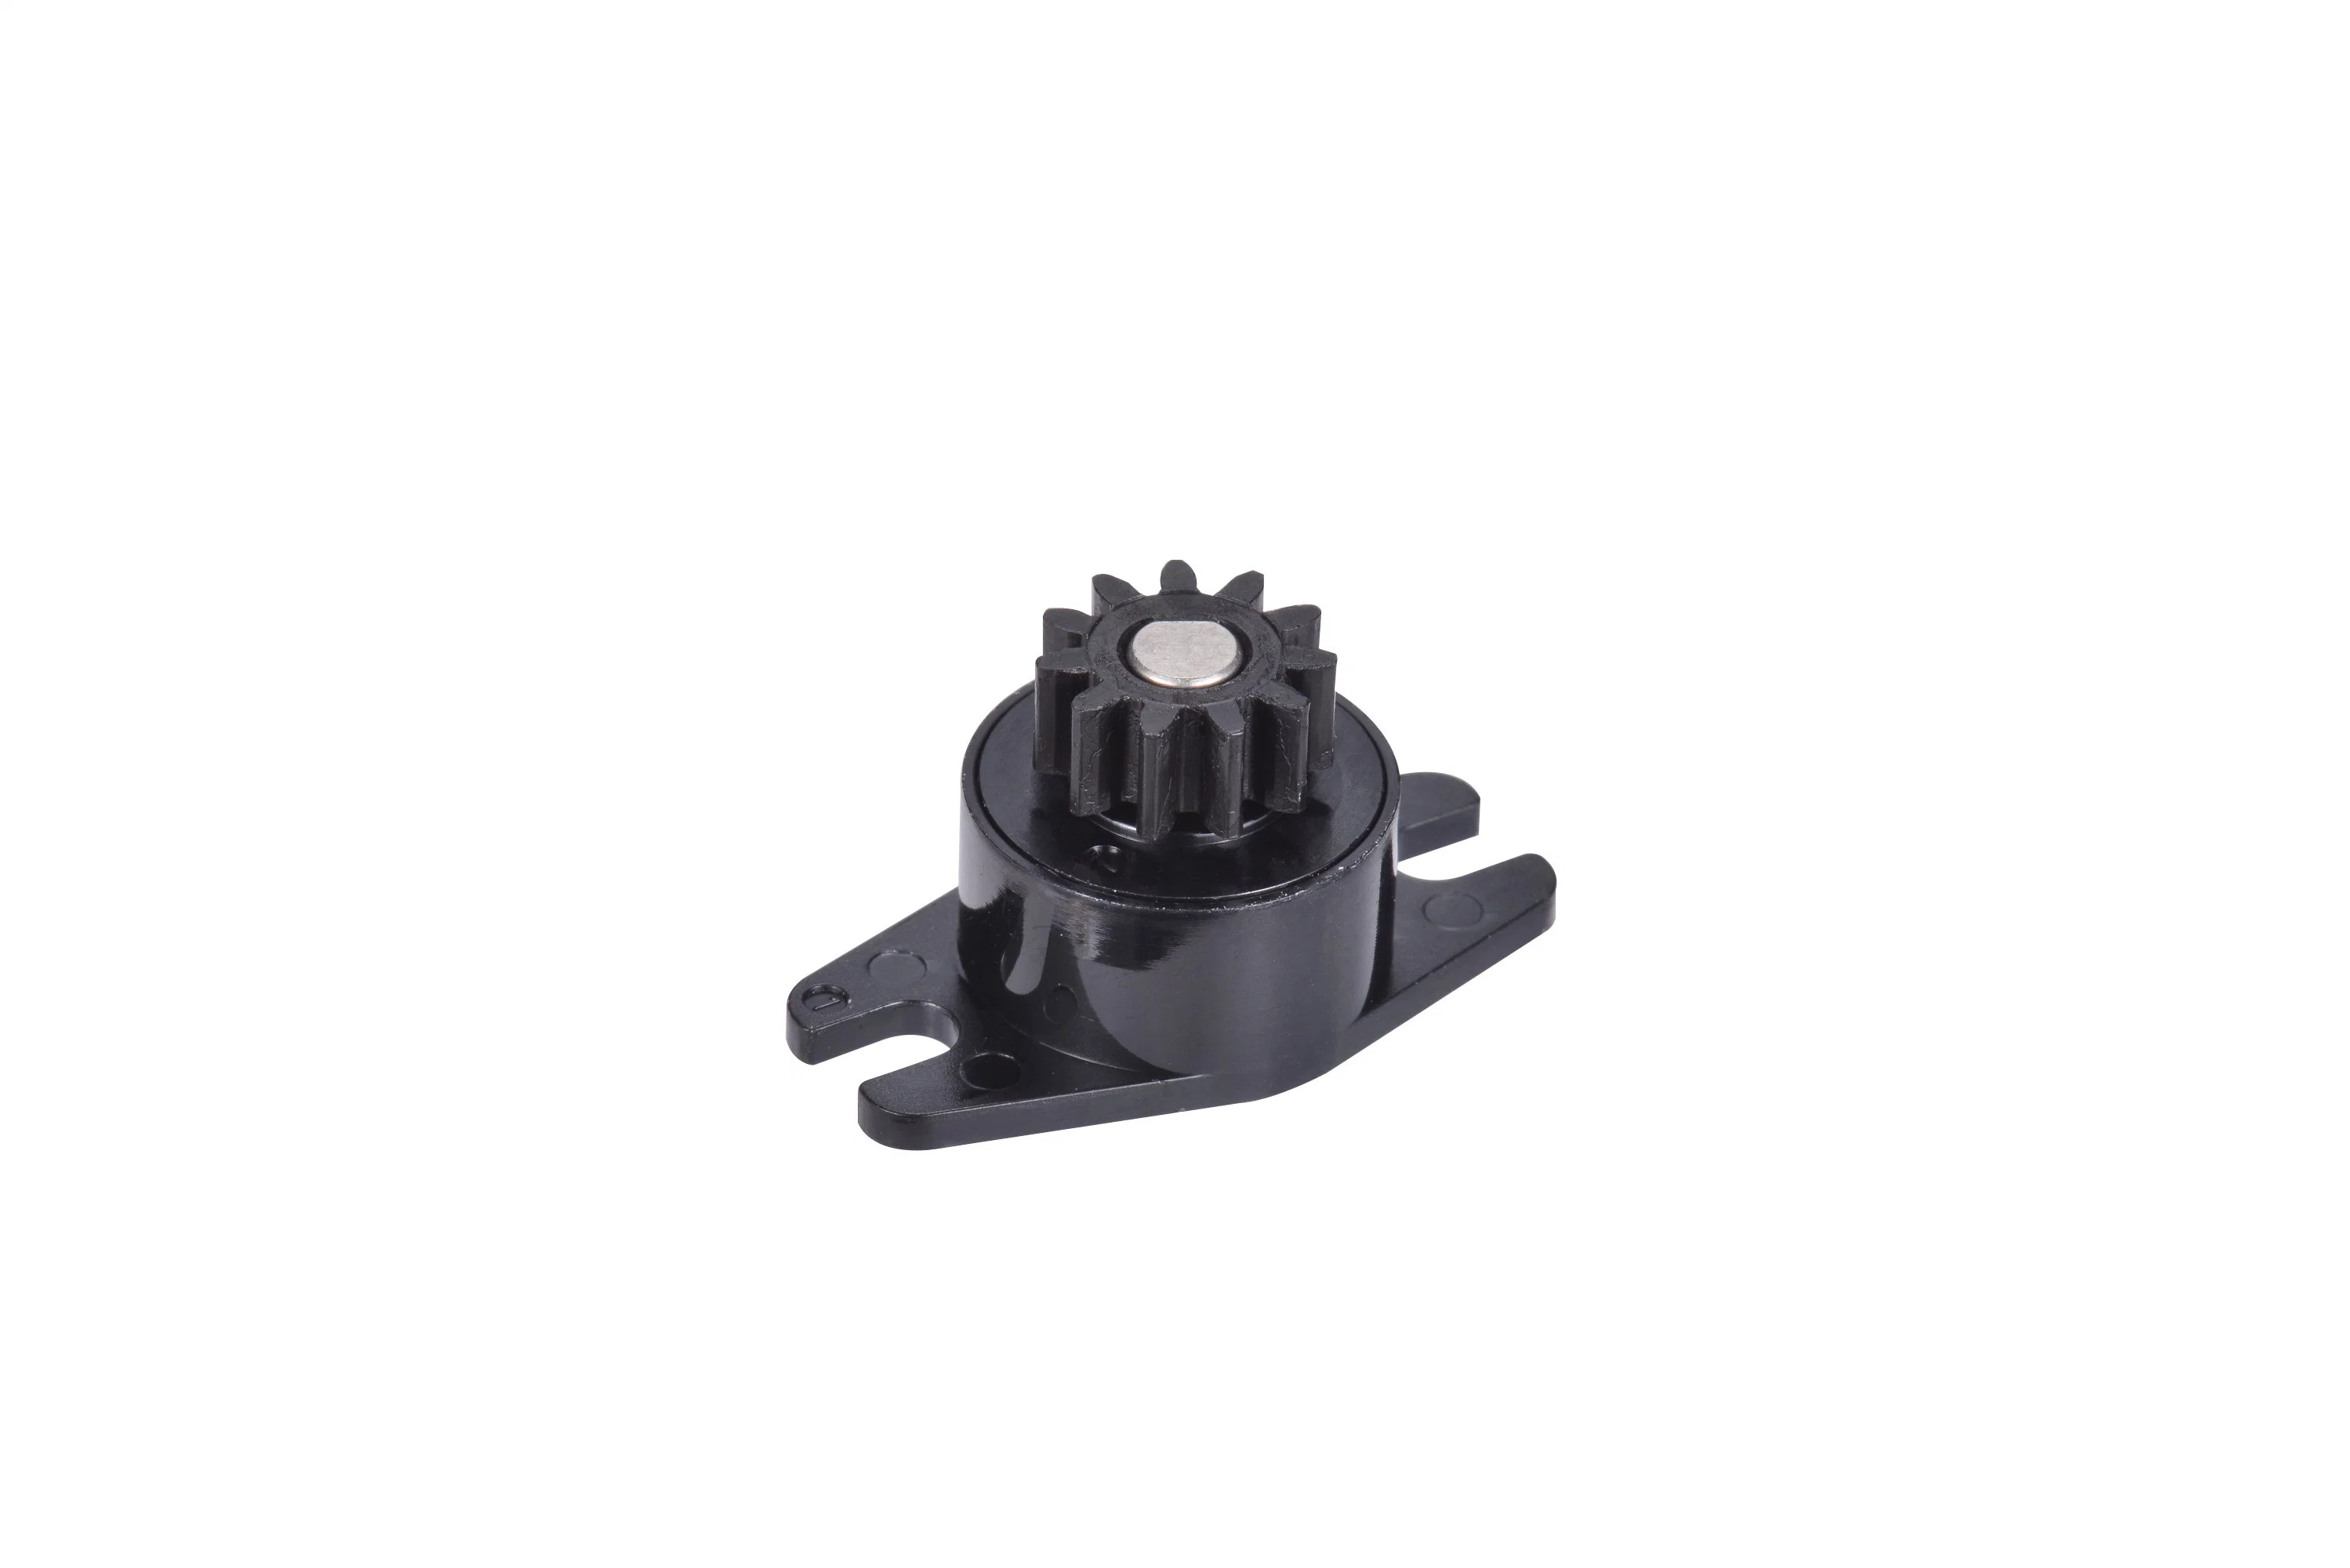 Precision Plastic Gear Mould Custom Injection Molding Plastic Gear Wheel for Rotary Dampers Clips D01007 CD Series